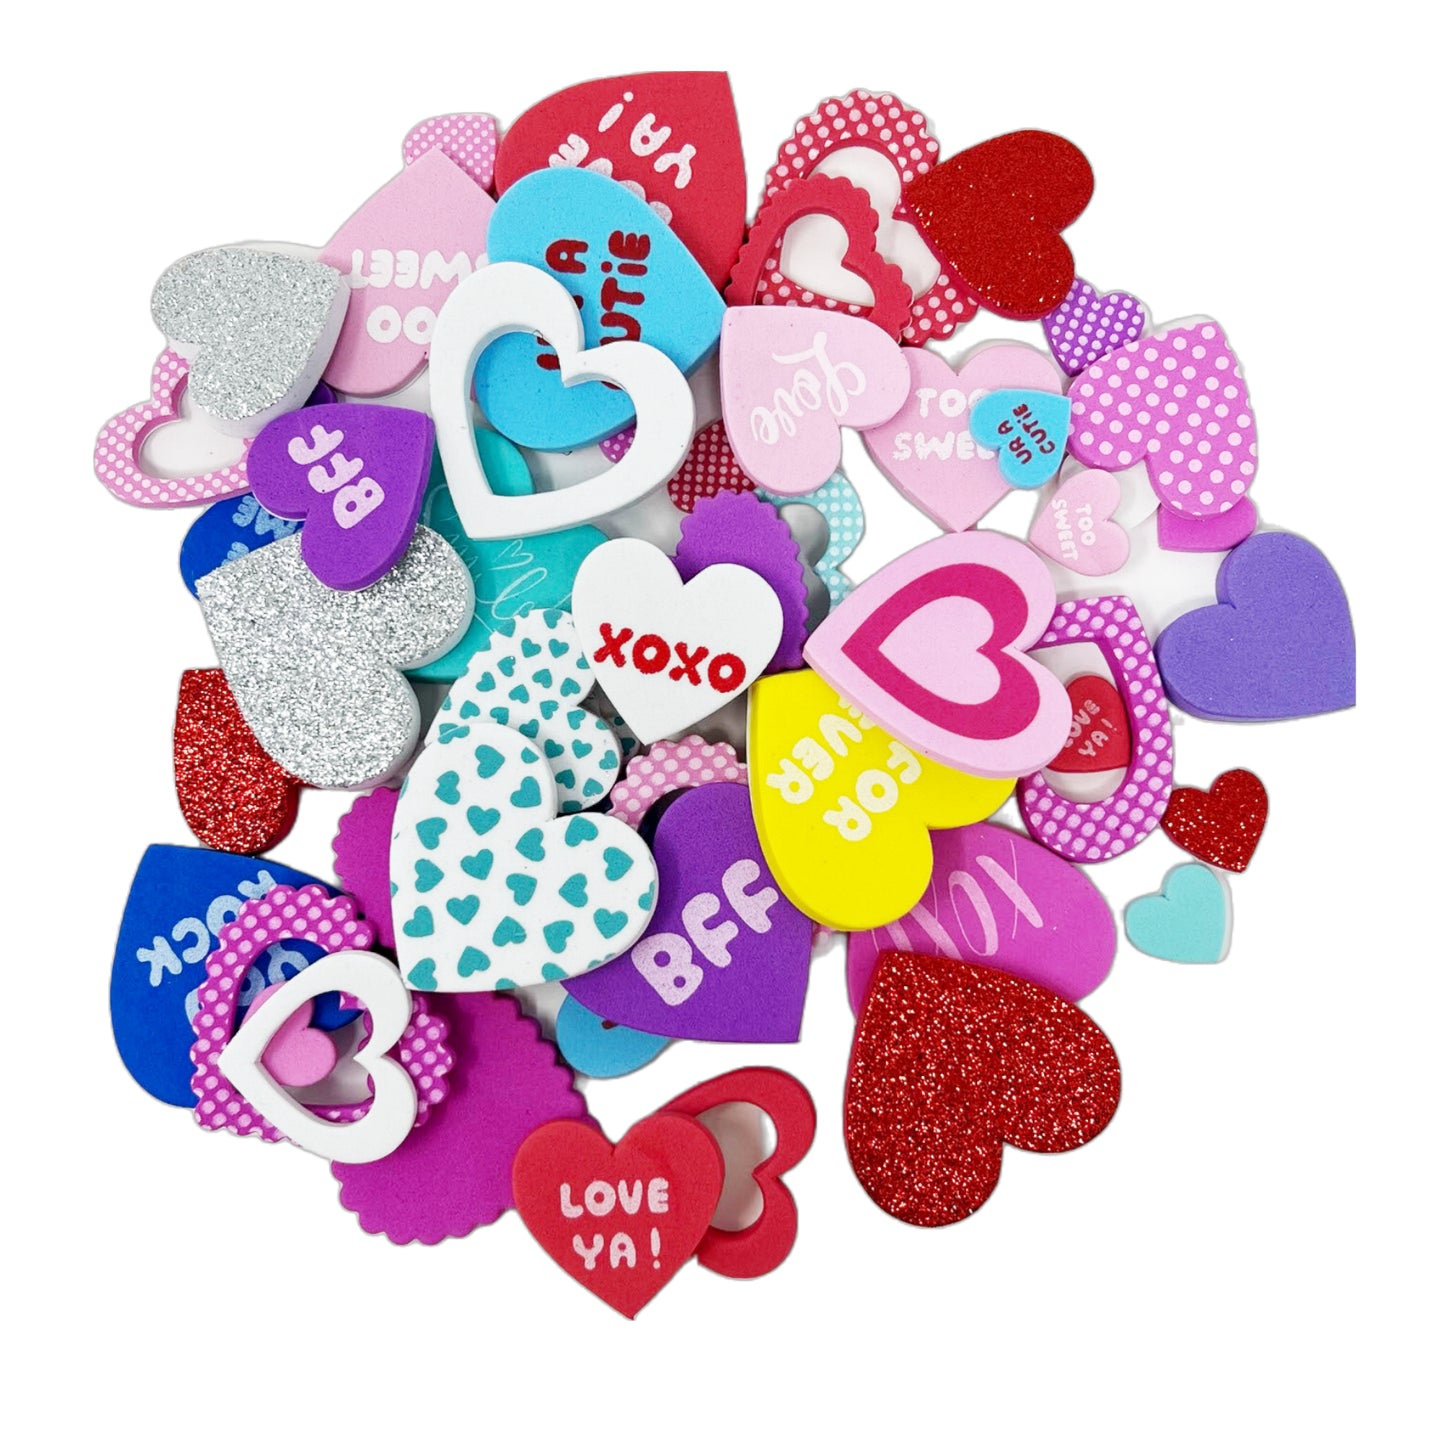 Cheep N Cheerful Valentines Day Craft Set, 30 Foam Hearts, 80 Foam Heart Stickers, Valentine's Day Party Décor, 110 Pcs